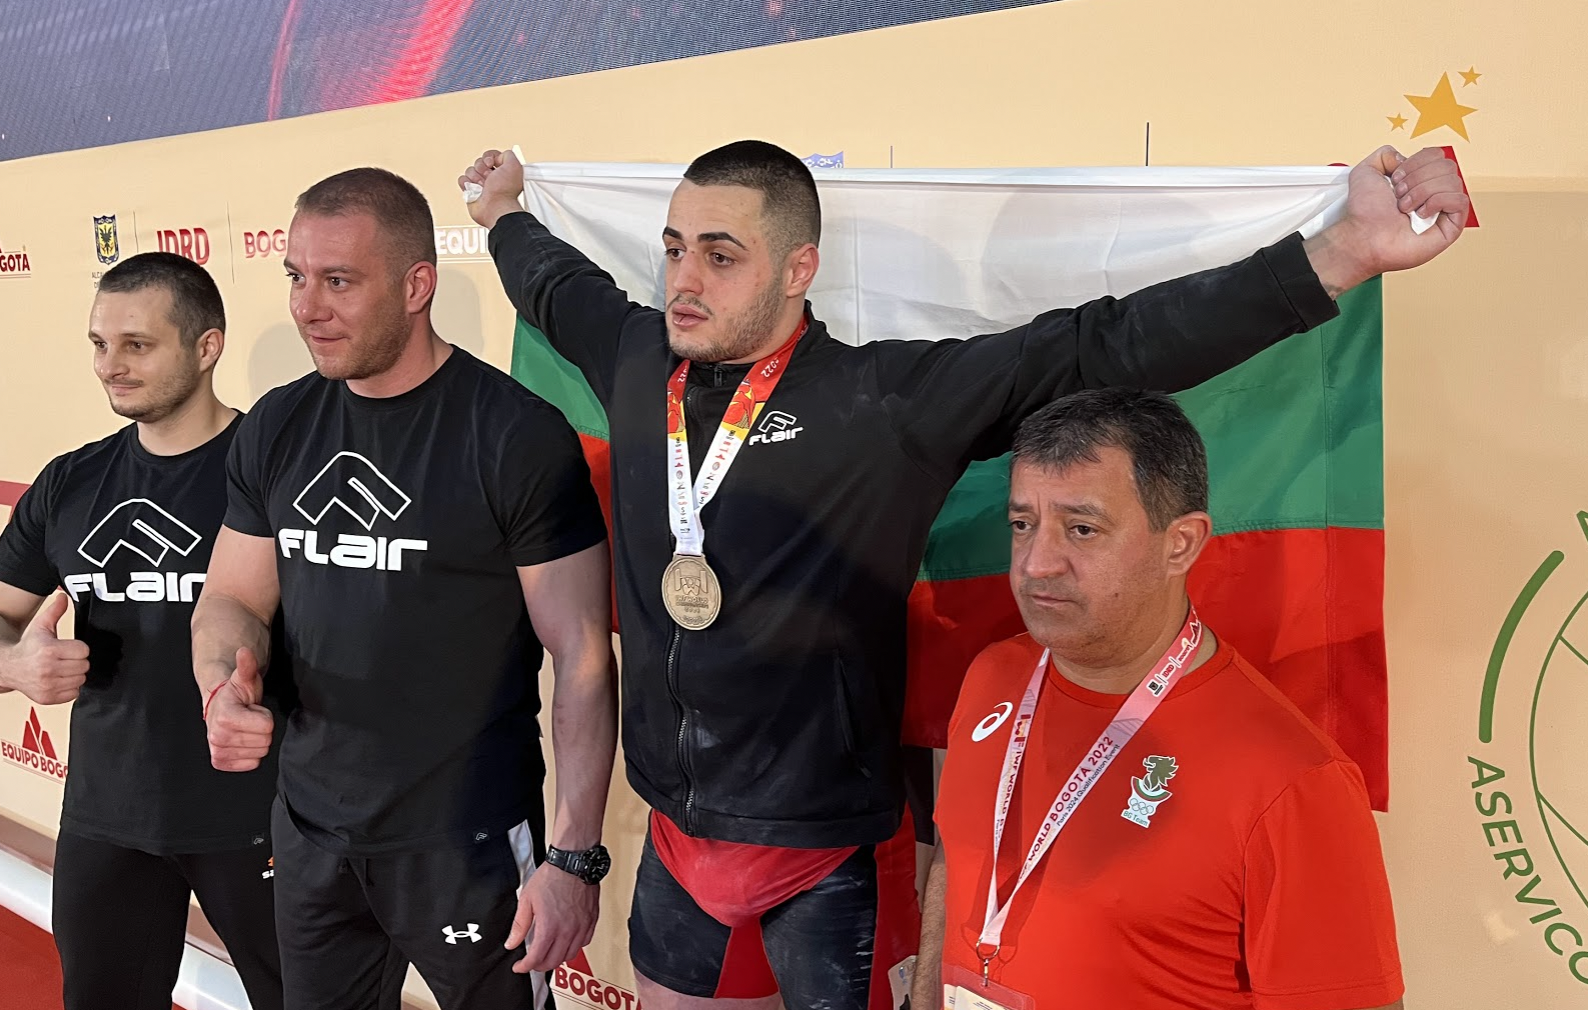 Suspended prison sentence leaves star Bulgarian weightlifter Nasar clear for Paris quest